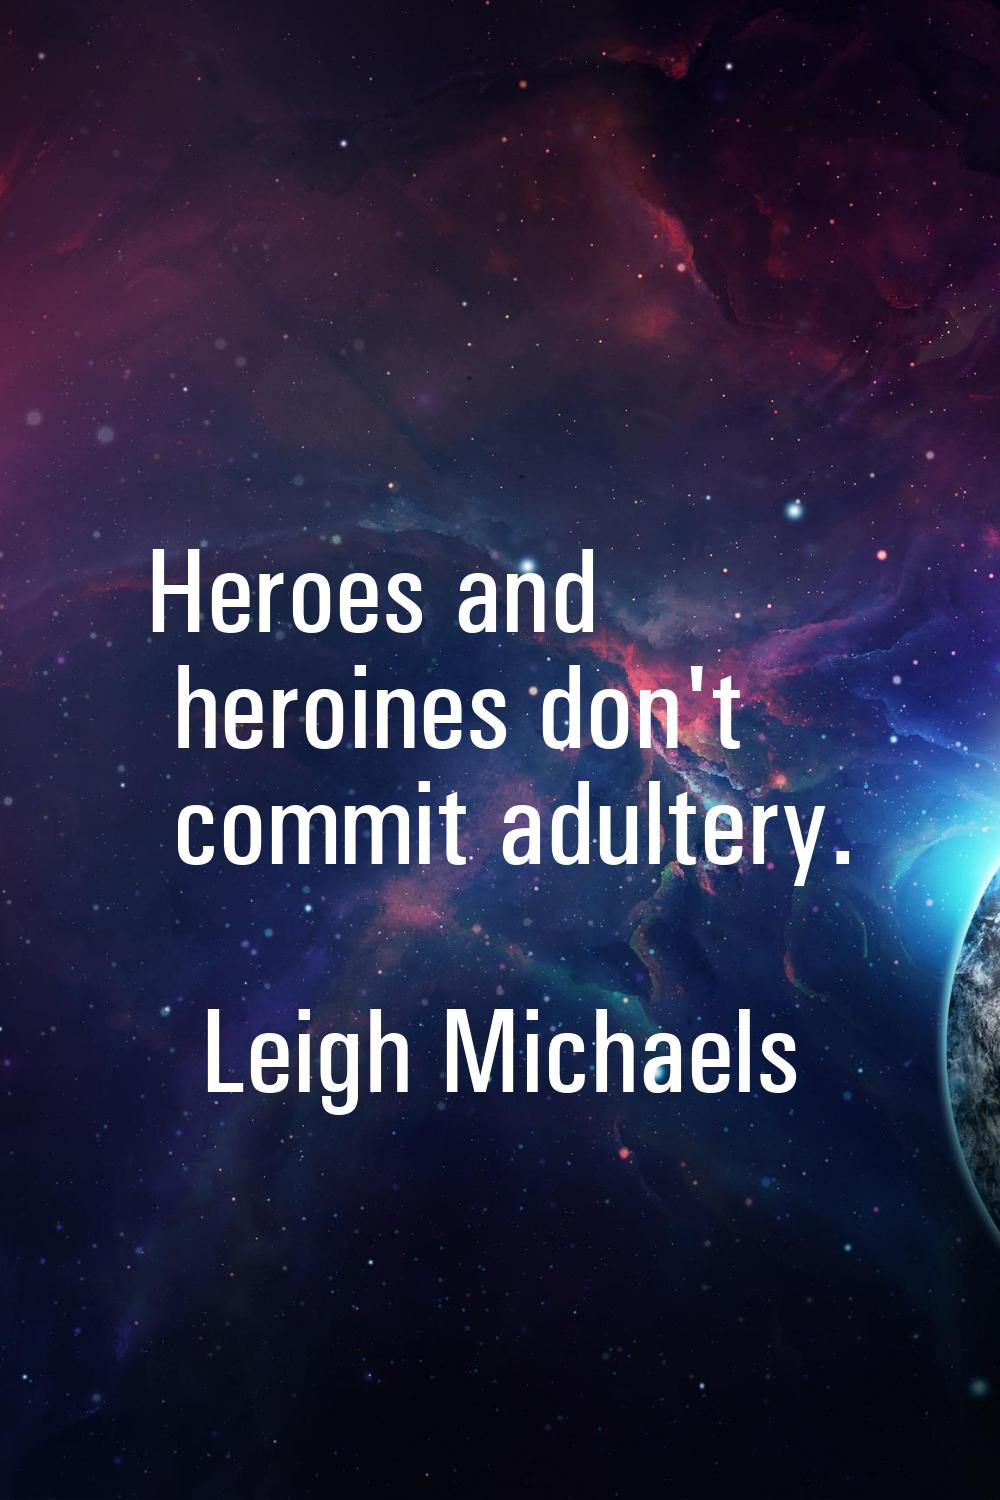 Heroes and heroines don't commit adultery.